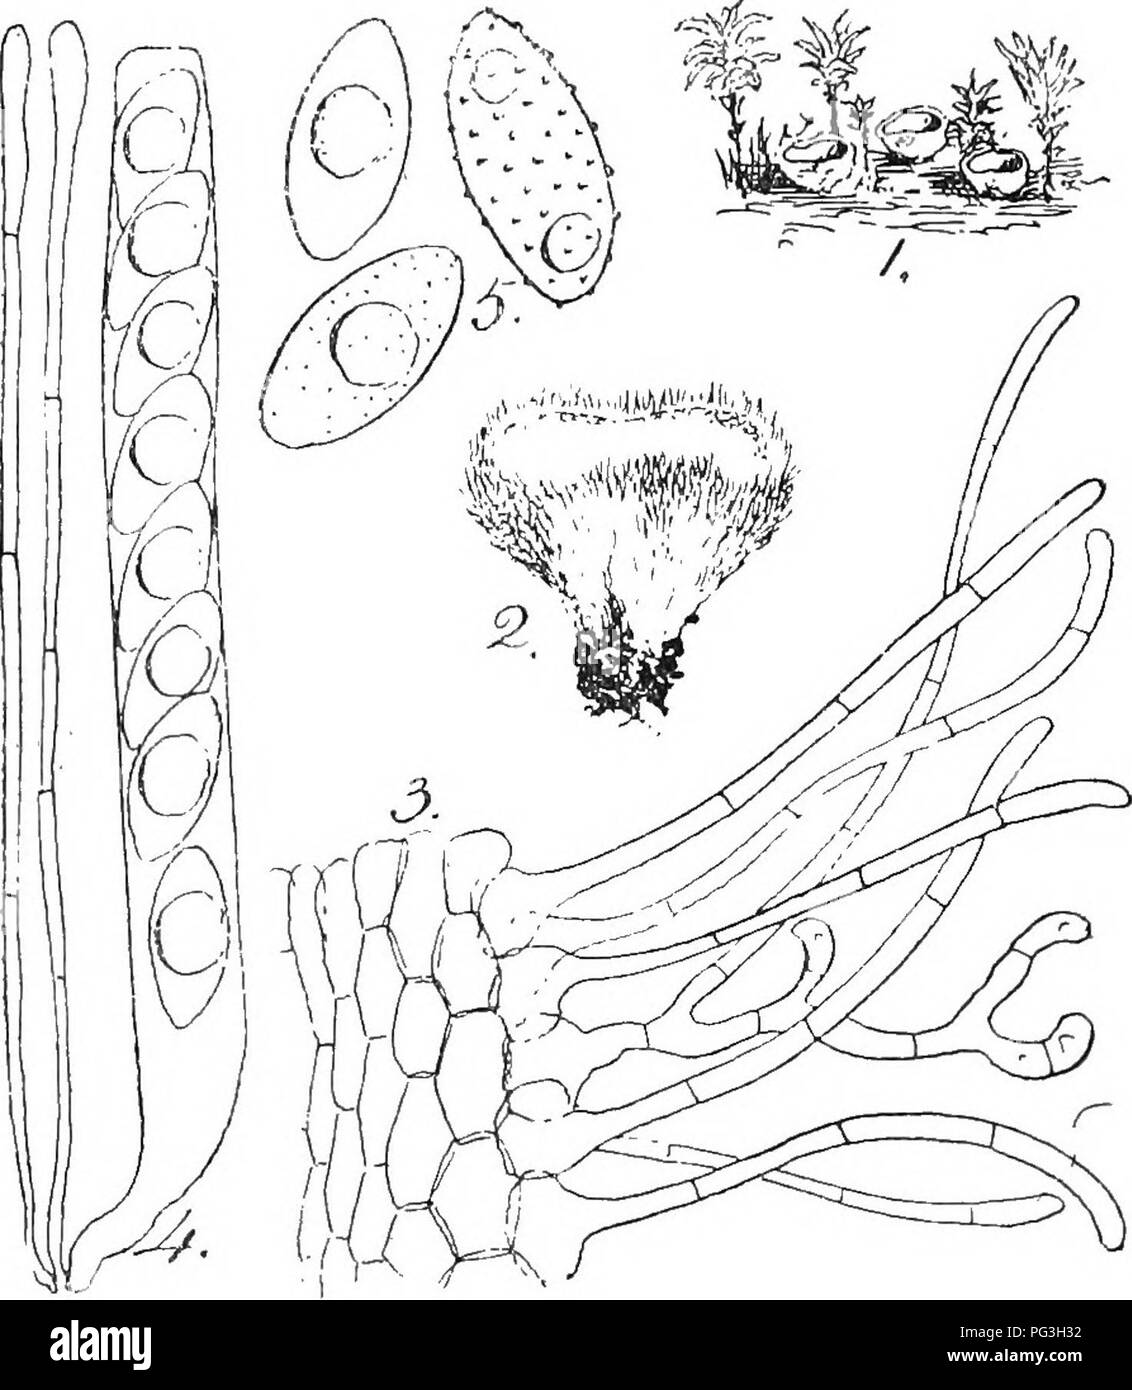 . British fungus-flora. A classified text-book of mycology. Fungi. NEOTTIELLA. 371 margin composed of hyaline, septate, cylindrical, thin-walled hyphae that are sometimes hranched, 80-100 x 6-7 /x, the hyphae are often arranged in little bundles; excipulum parenchymatous, cells elongated in the direction from base. Neottiella polytricM. Fig. 1, small specimens, natural size;âPig. 2, specimen, x 5; Fig. 3, section of portion of excipulum, x 400;âFig. 4, aacus â with spores and paraphyses, x 400;âFig. 5, spores in various stages of development, x 800. to margin ; cortical cells irregularly polj- Stock Photo